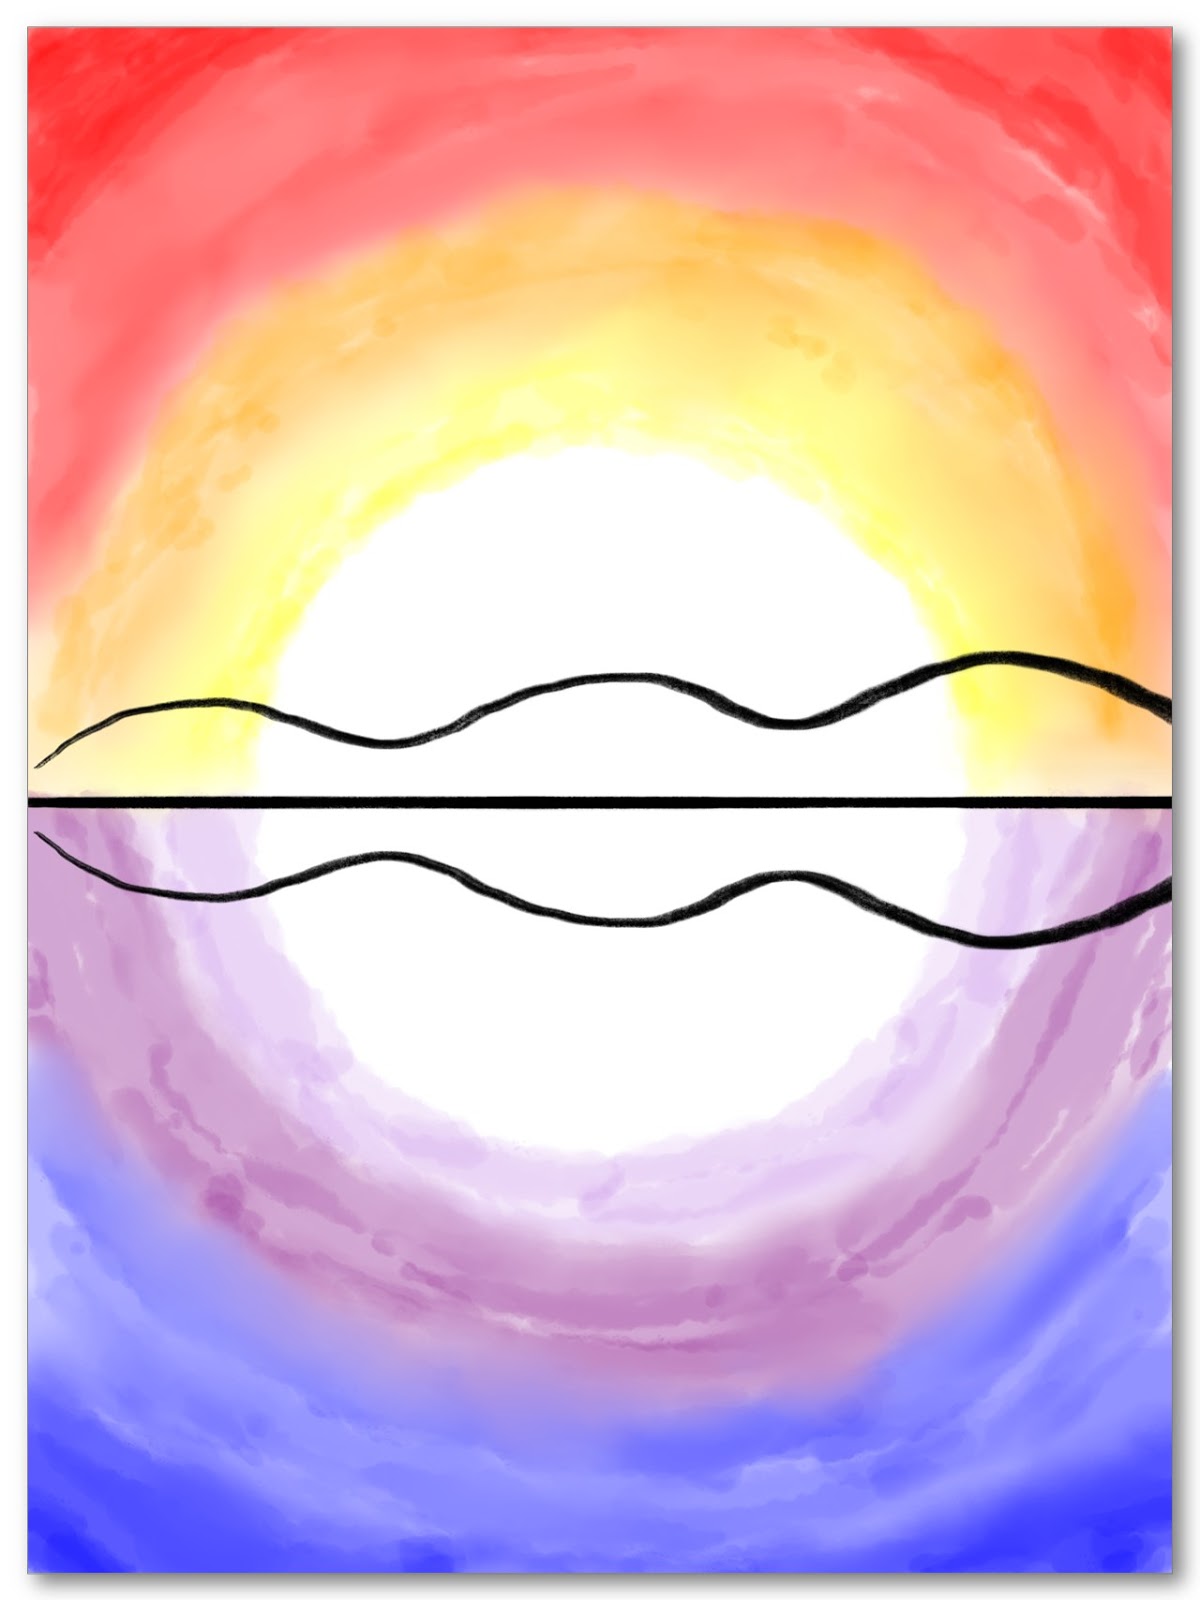 Sunset painting with horizon and land element.